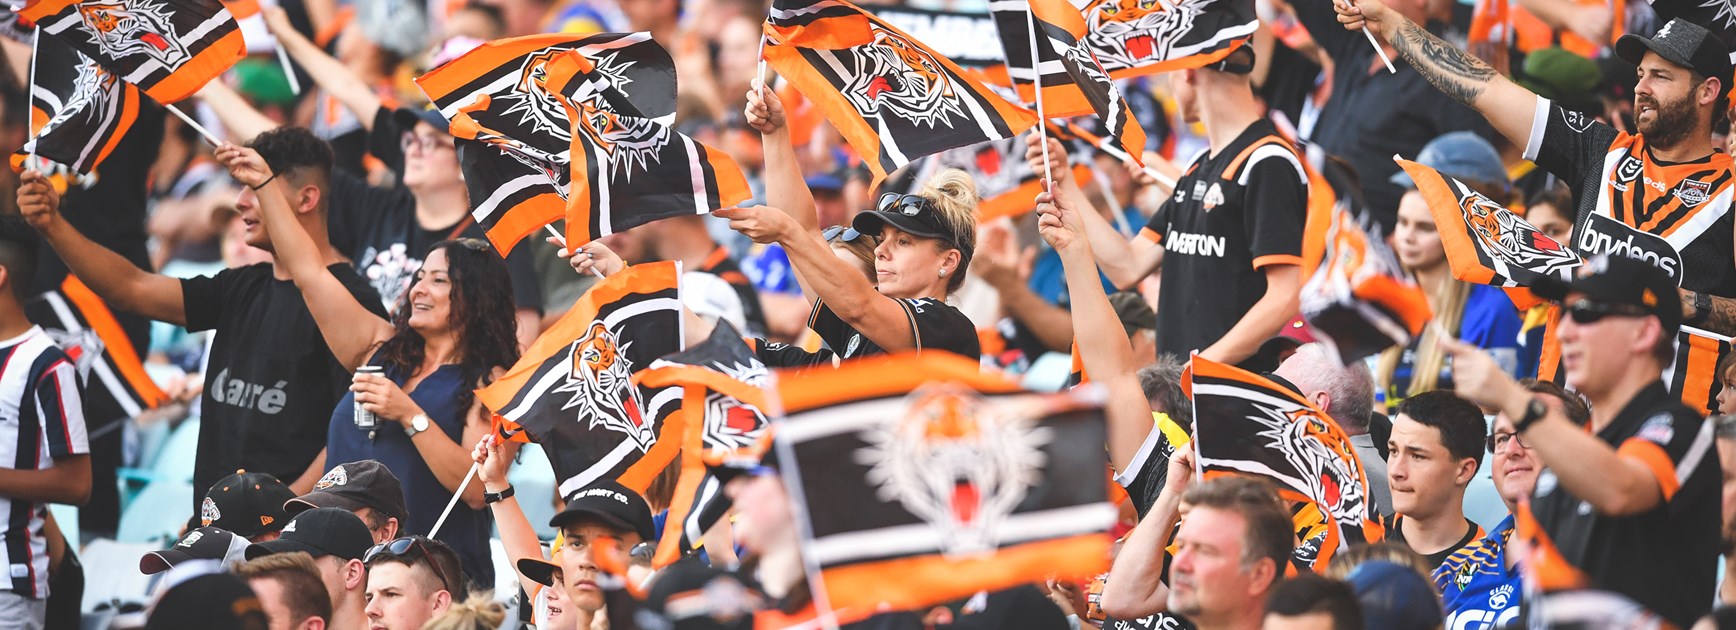 Wests Tigers offering four days of Member offers